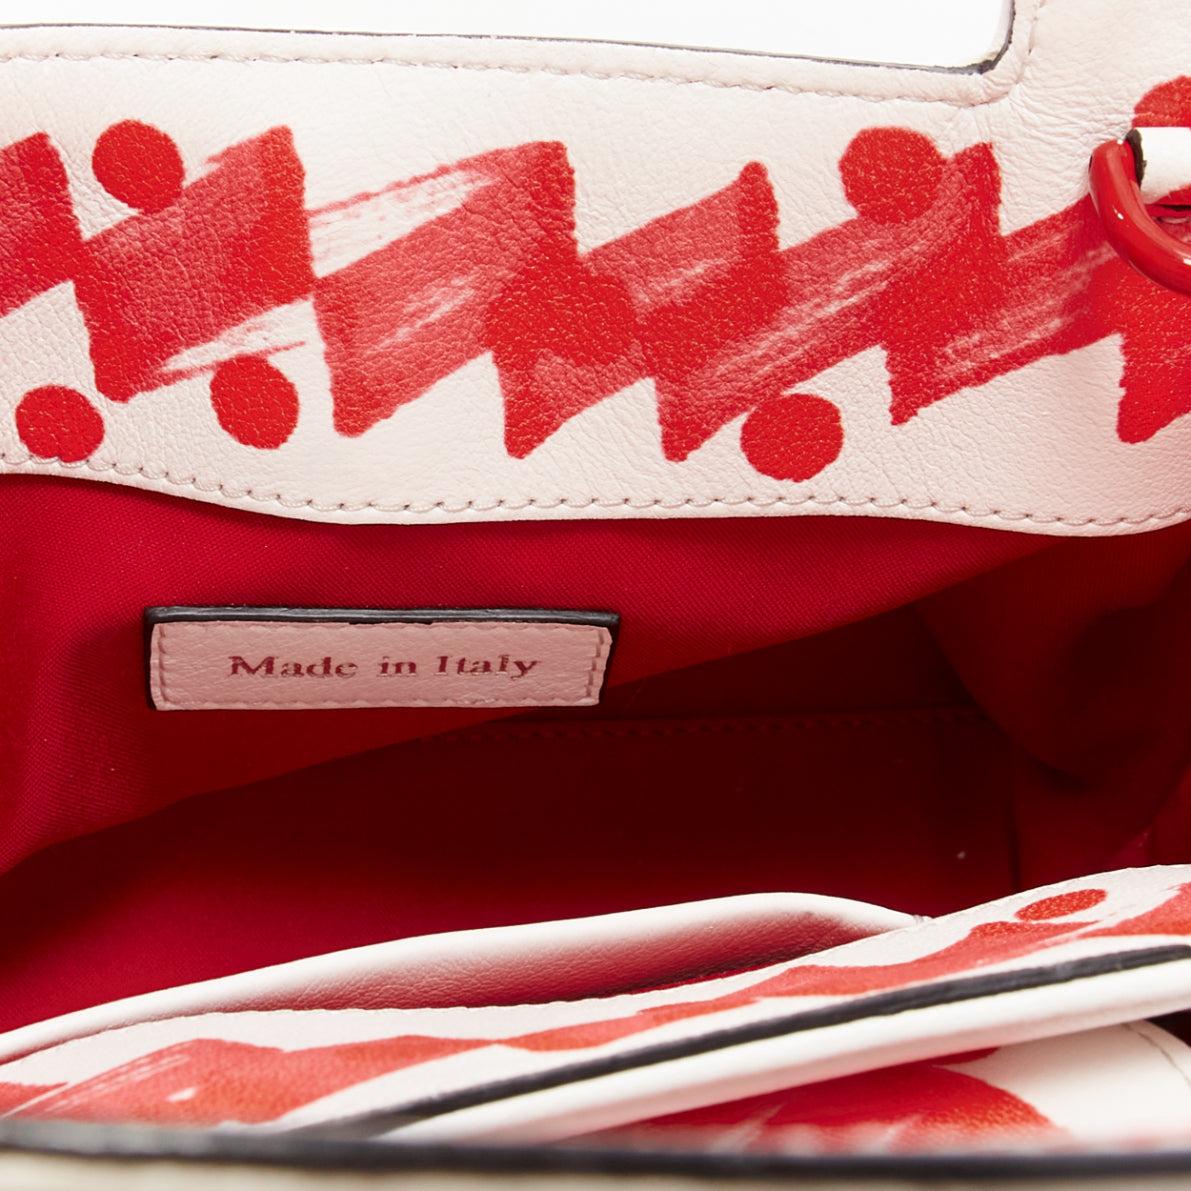 MOSCHINO Jeremy Scott 2019 Runway red white scribble marker crossbody bag For Sale 7